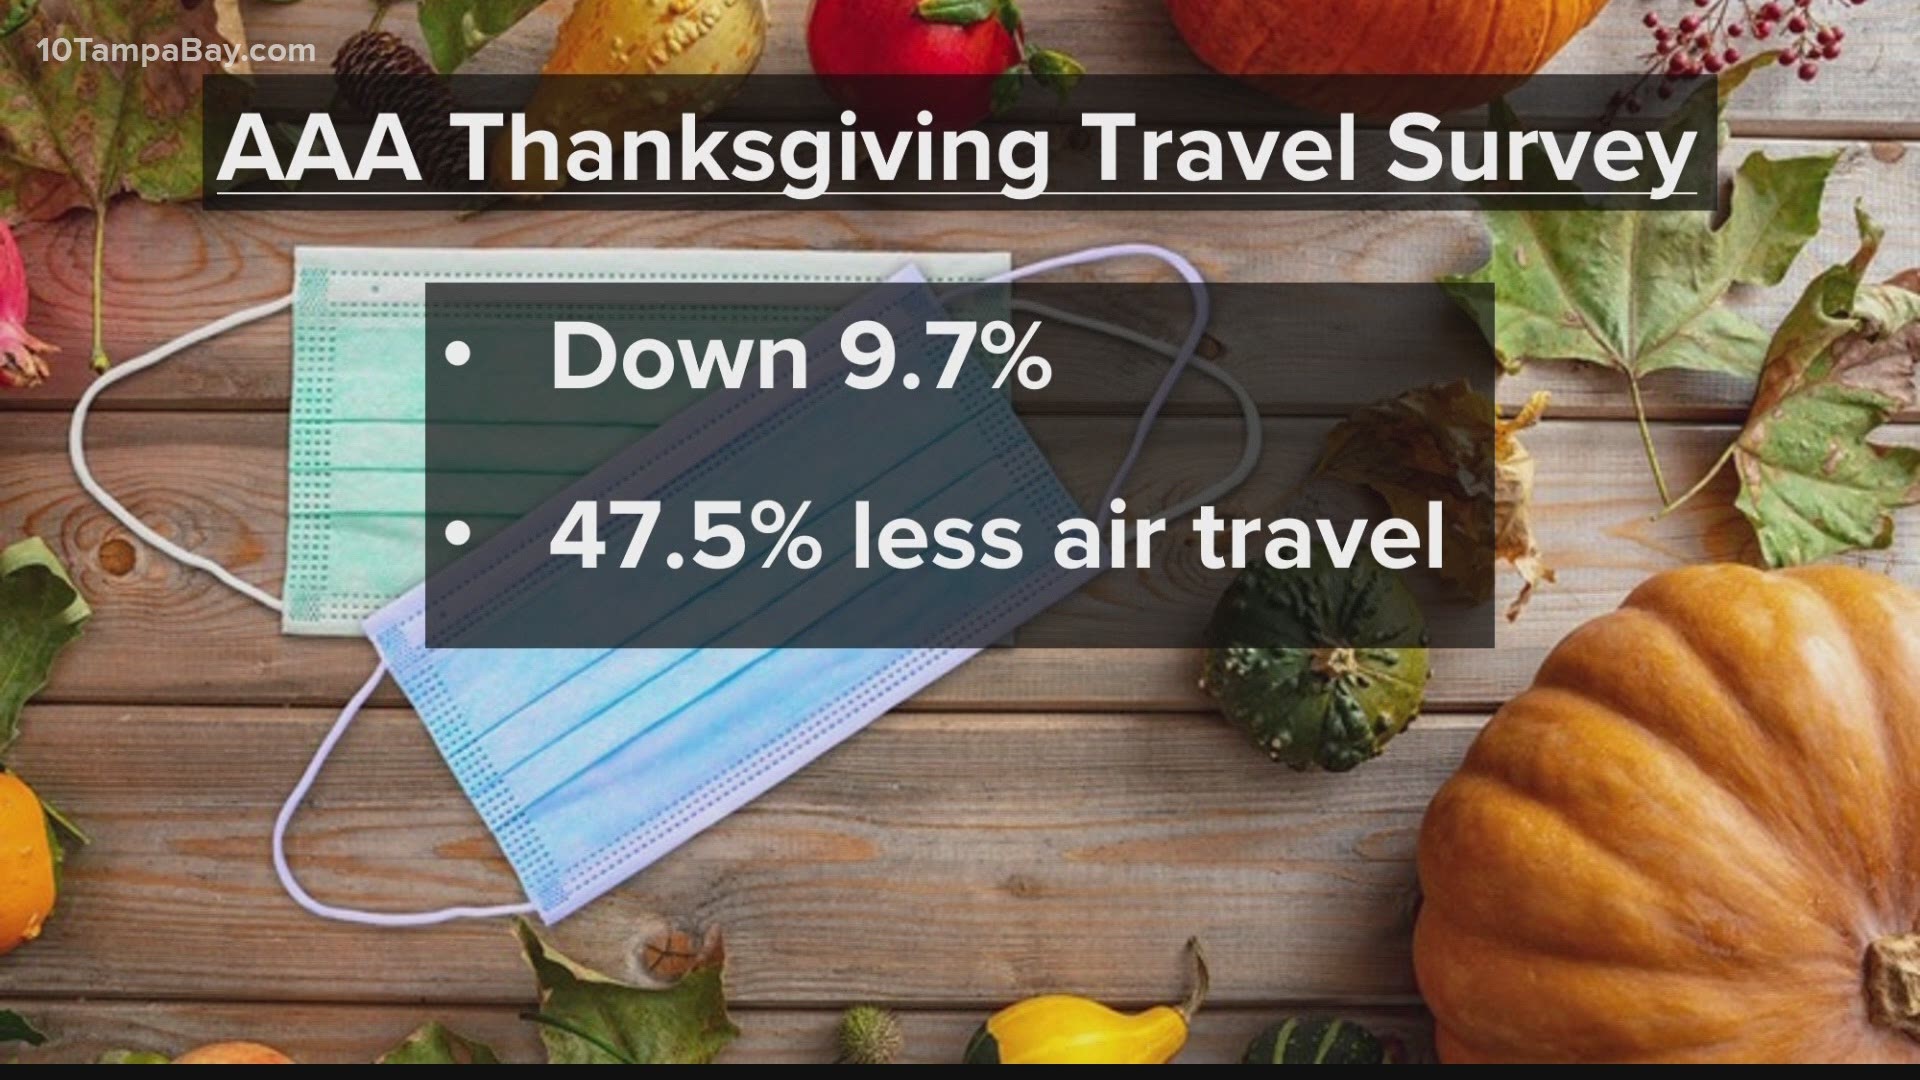 AAA says automobile traffic is projected to make up about 95 percent of all holiday travel, and the organization knows COVID-19 is on people’s minds.